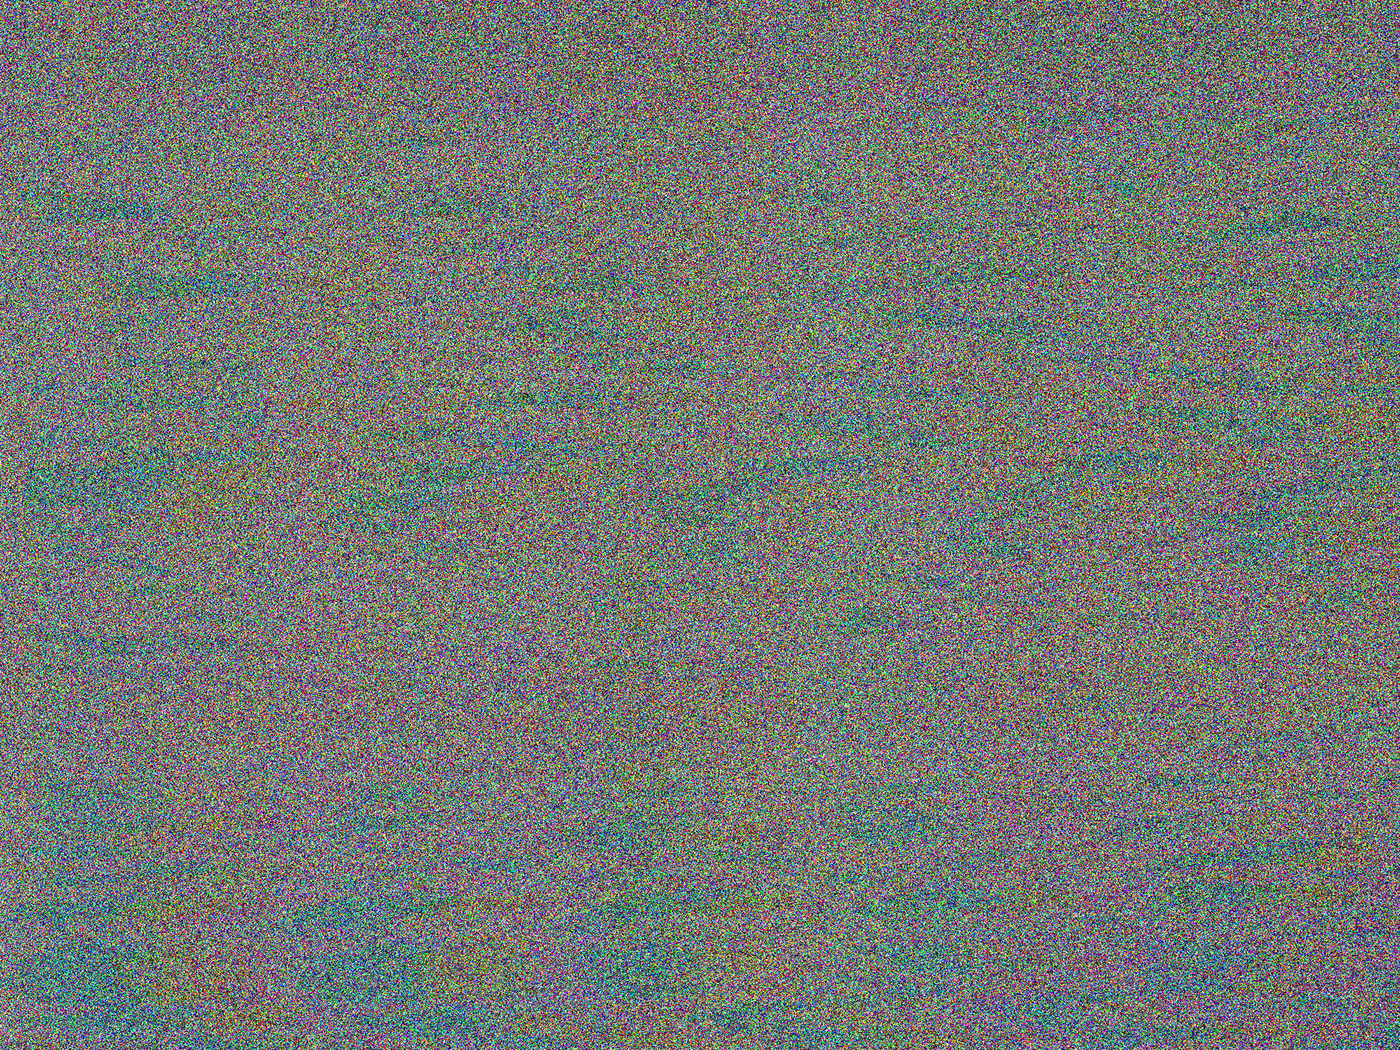 glitch texture free noise free textures vhs box texture free VHS extures vhs noise VHS noise free template VHS noise free textures VHS noise textures vhs overlay JPG vhs static texture